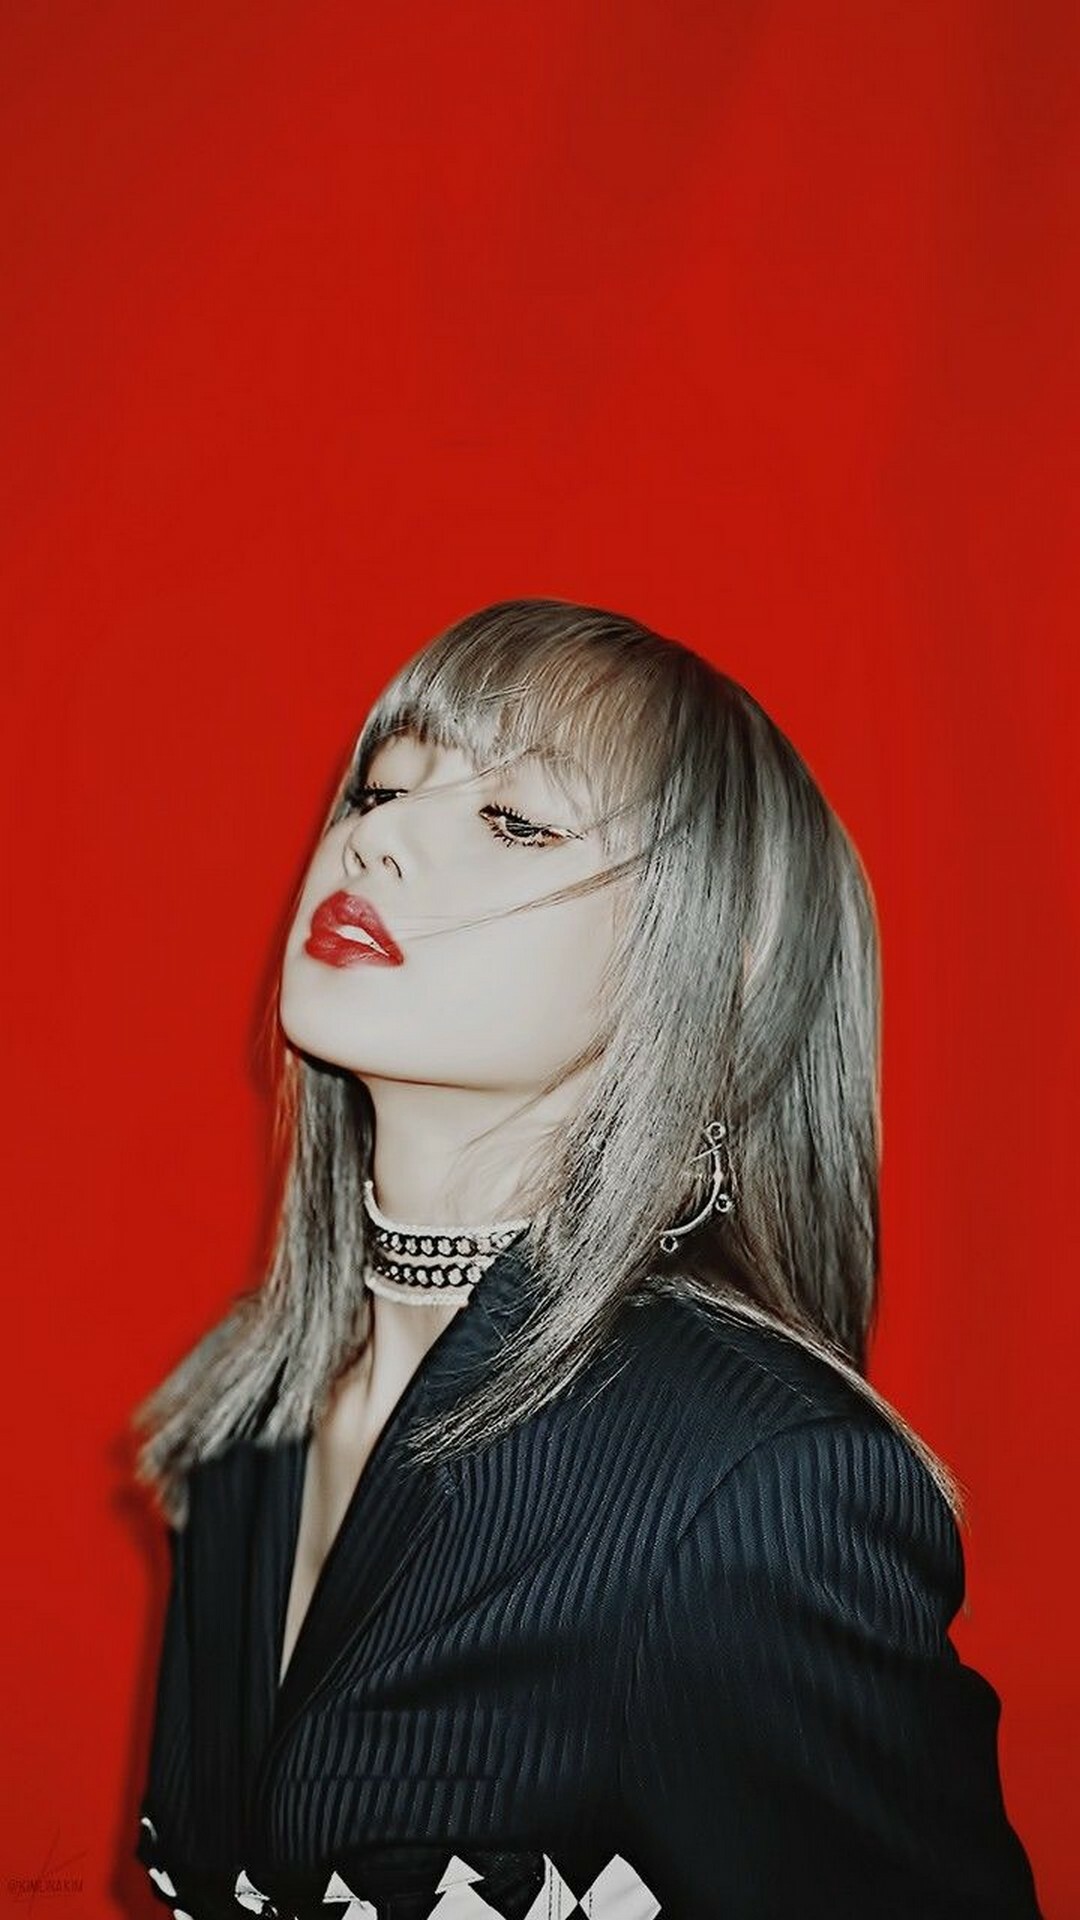 BLACKPINK: Lisa, The band released their debut single album, Square One, on August 8, 2016. 1080x1920 Full HD Wallpaper.